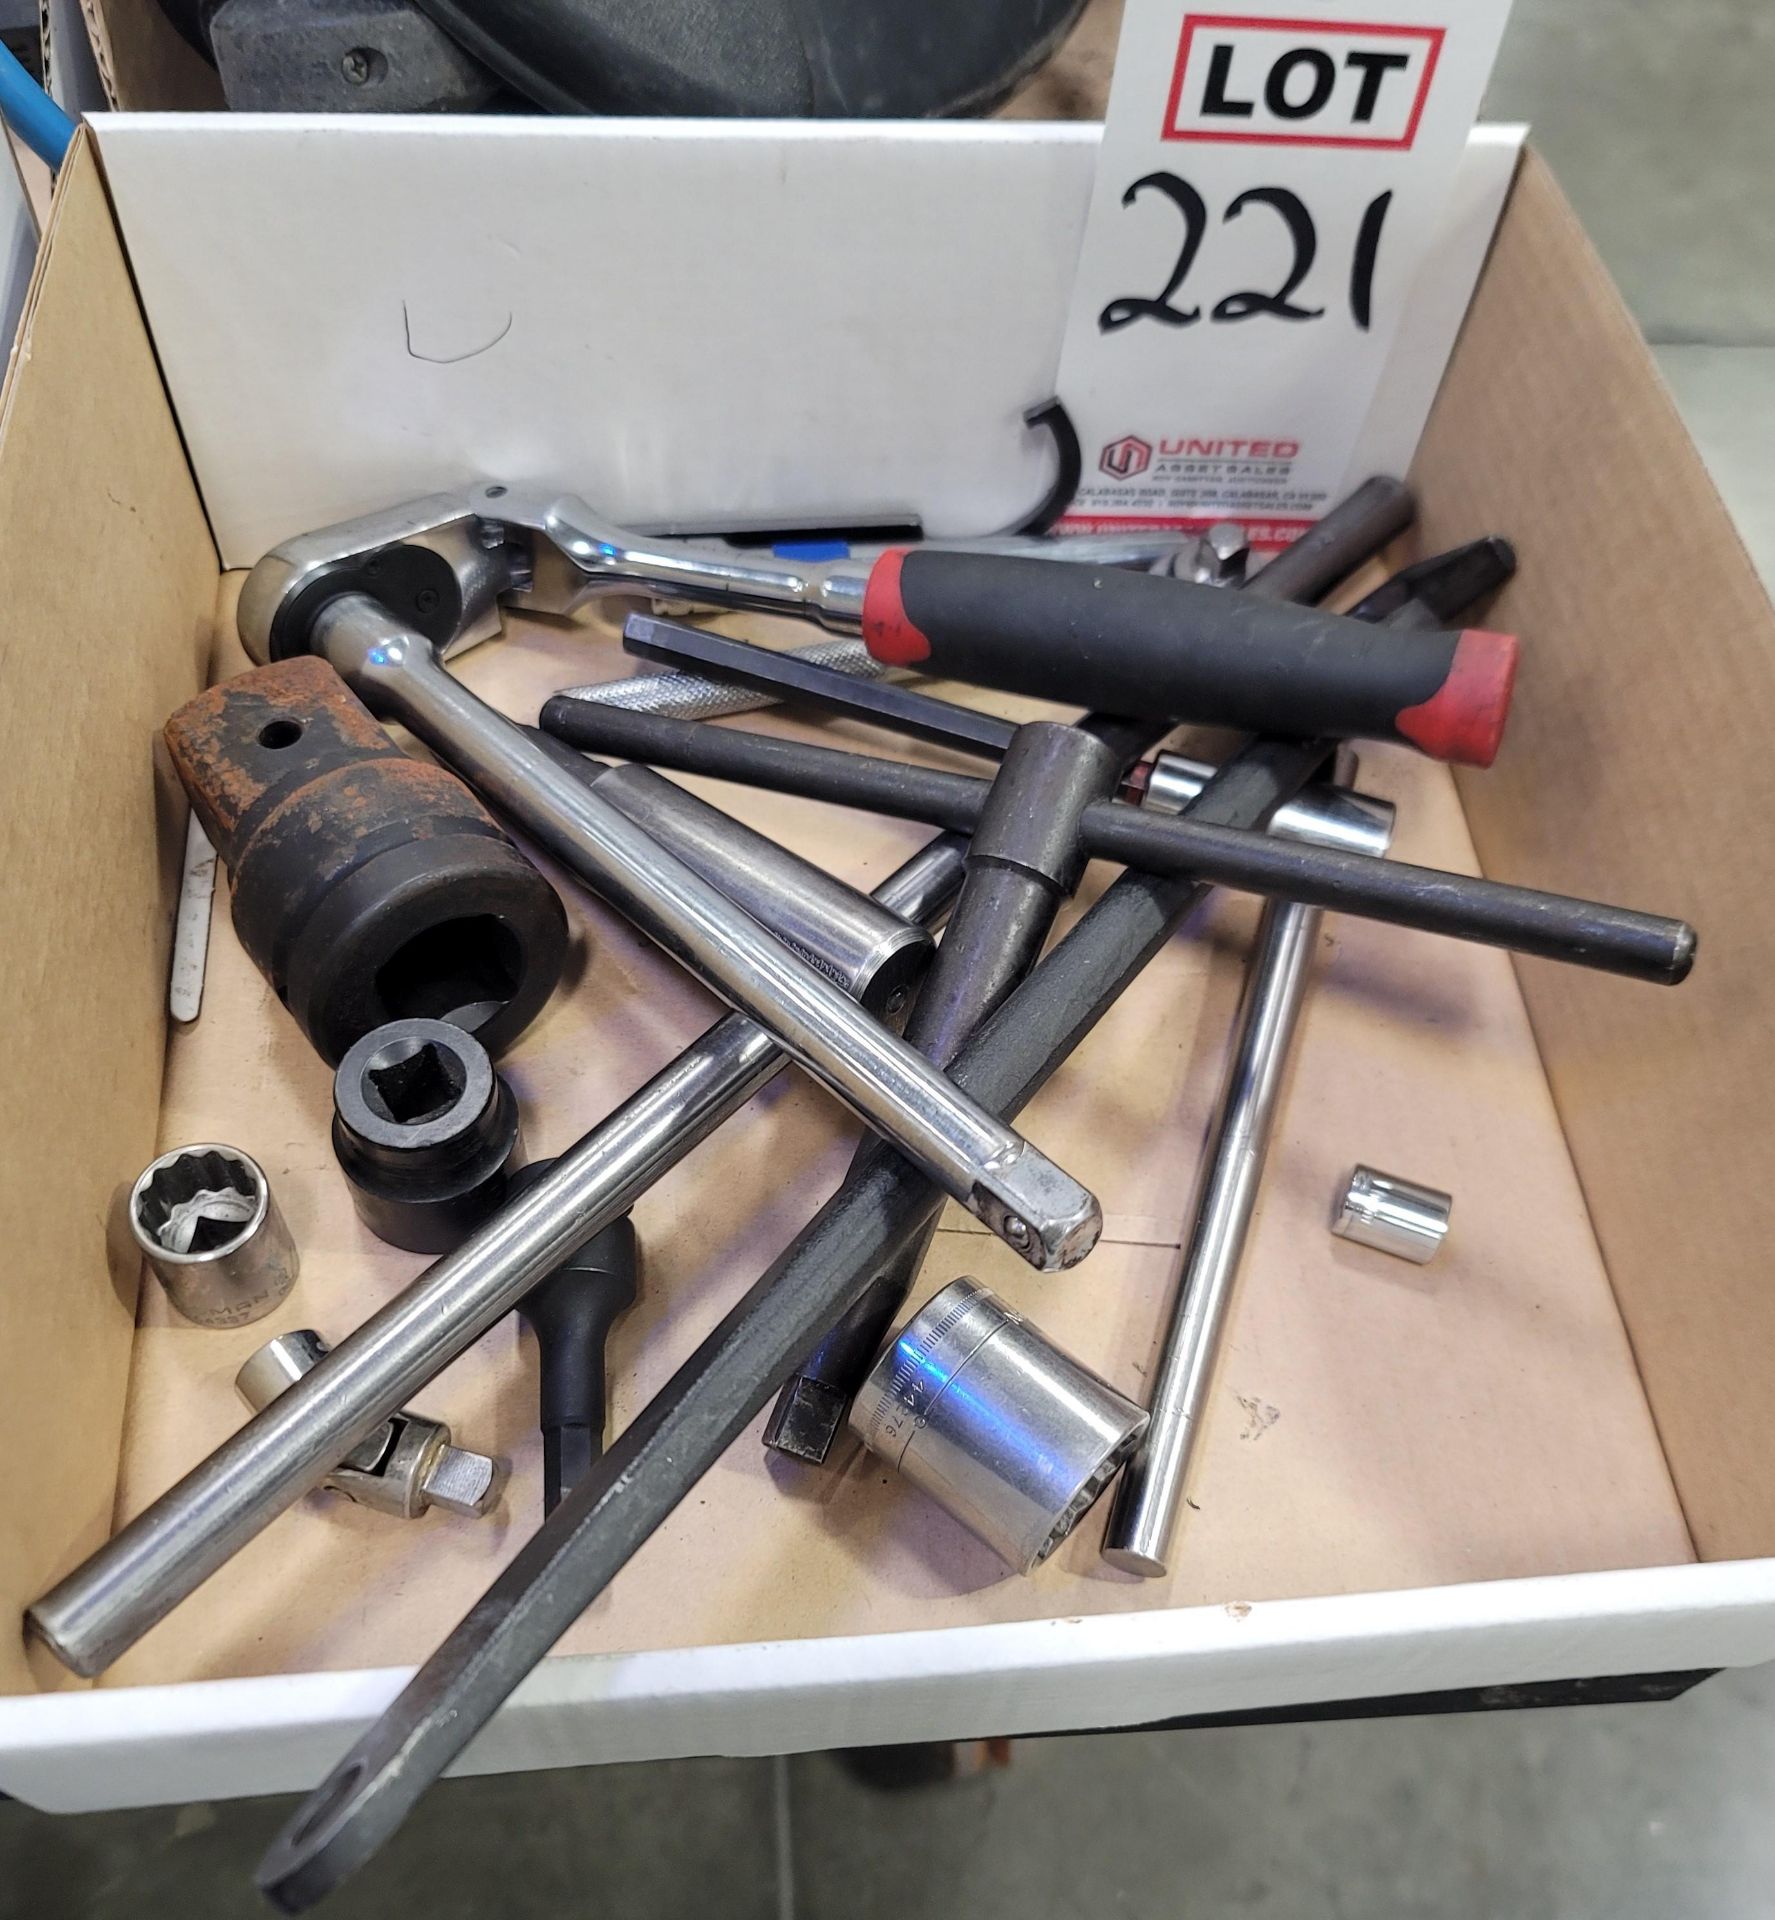 LOT - LARGE IMPACT 1" TO 1-1/2" DRIVE ADAPTOR, SOCKET WRENCHES, T-HANDLE SOCKET WRENCHES